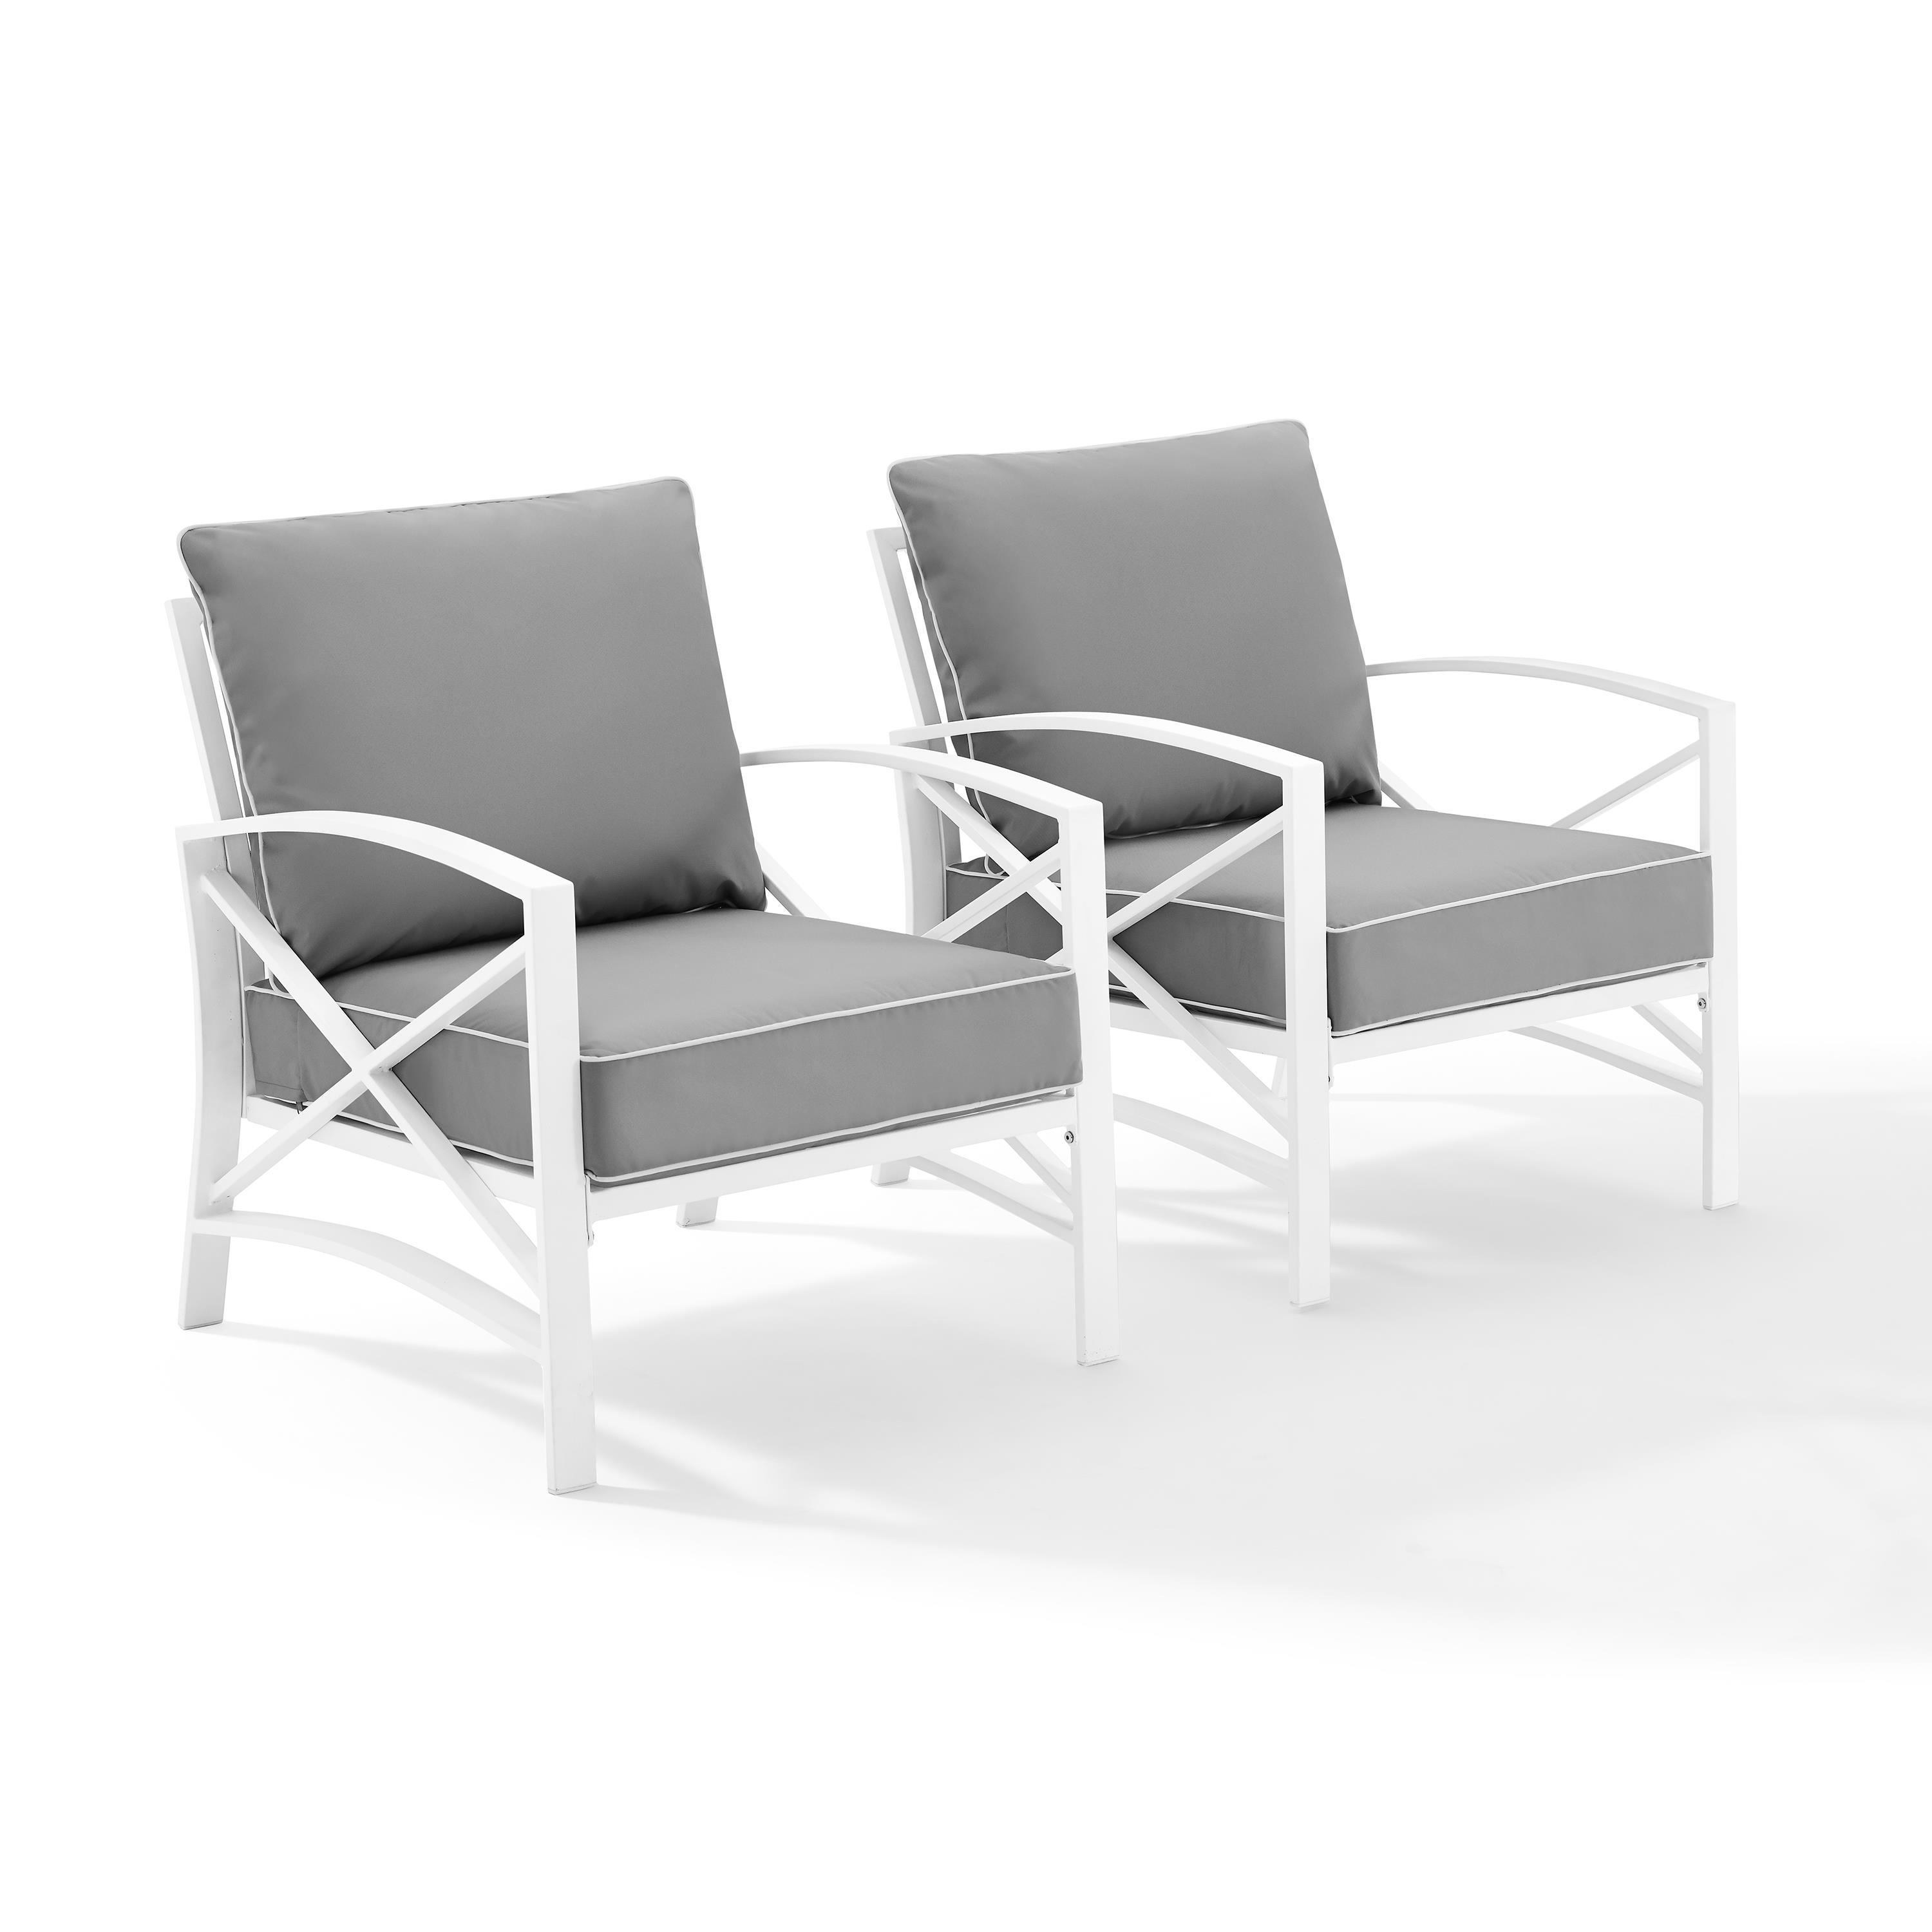 Crosley Kaplan Patio Arm Chair in Gray and White (Set of 2) - image 3 of 7